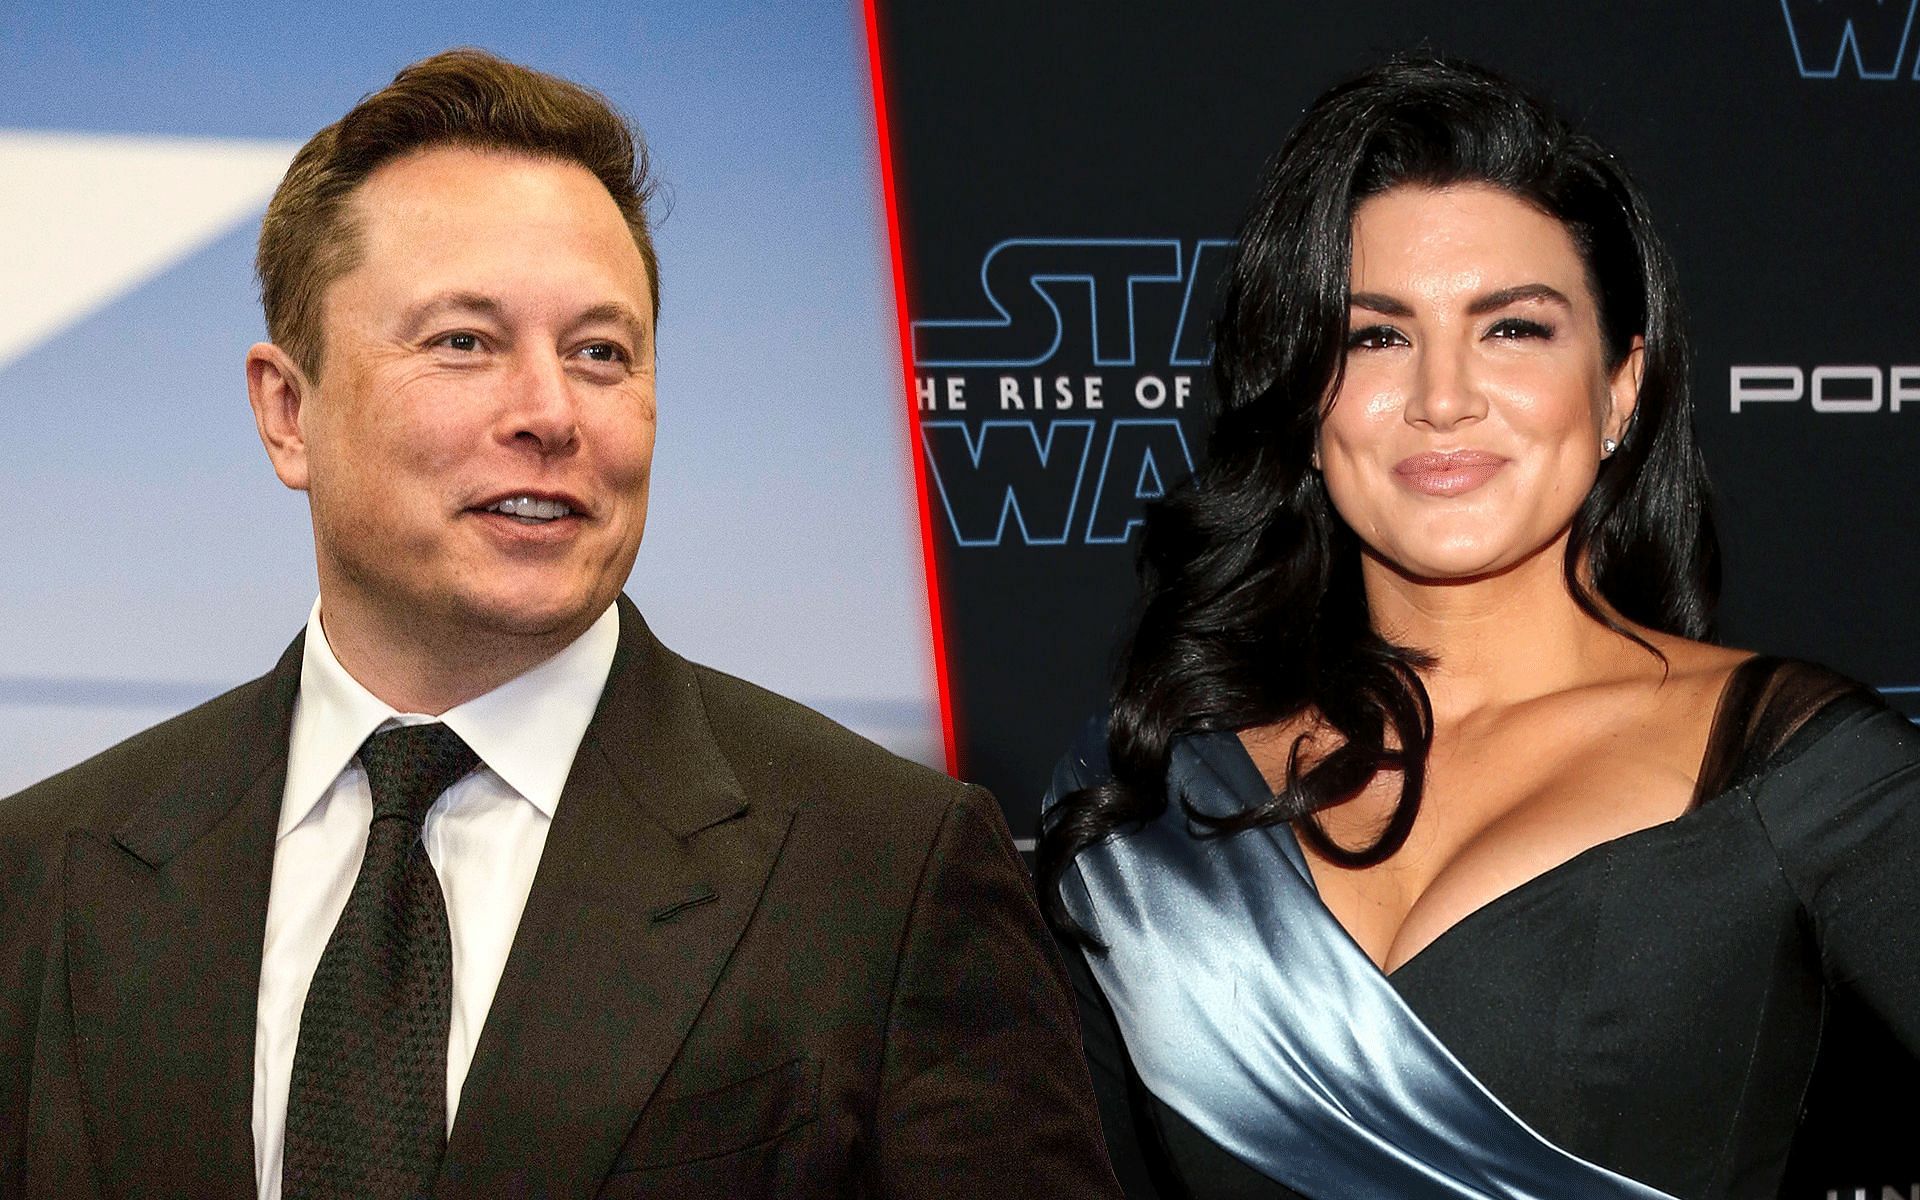 Elon Musk (left) has been providing Gina Carano (right) financial assistance in her lawsuit against Disney [Images courtesy: Getty Images]